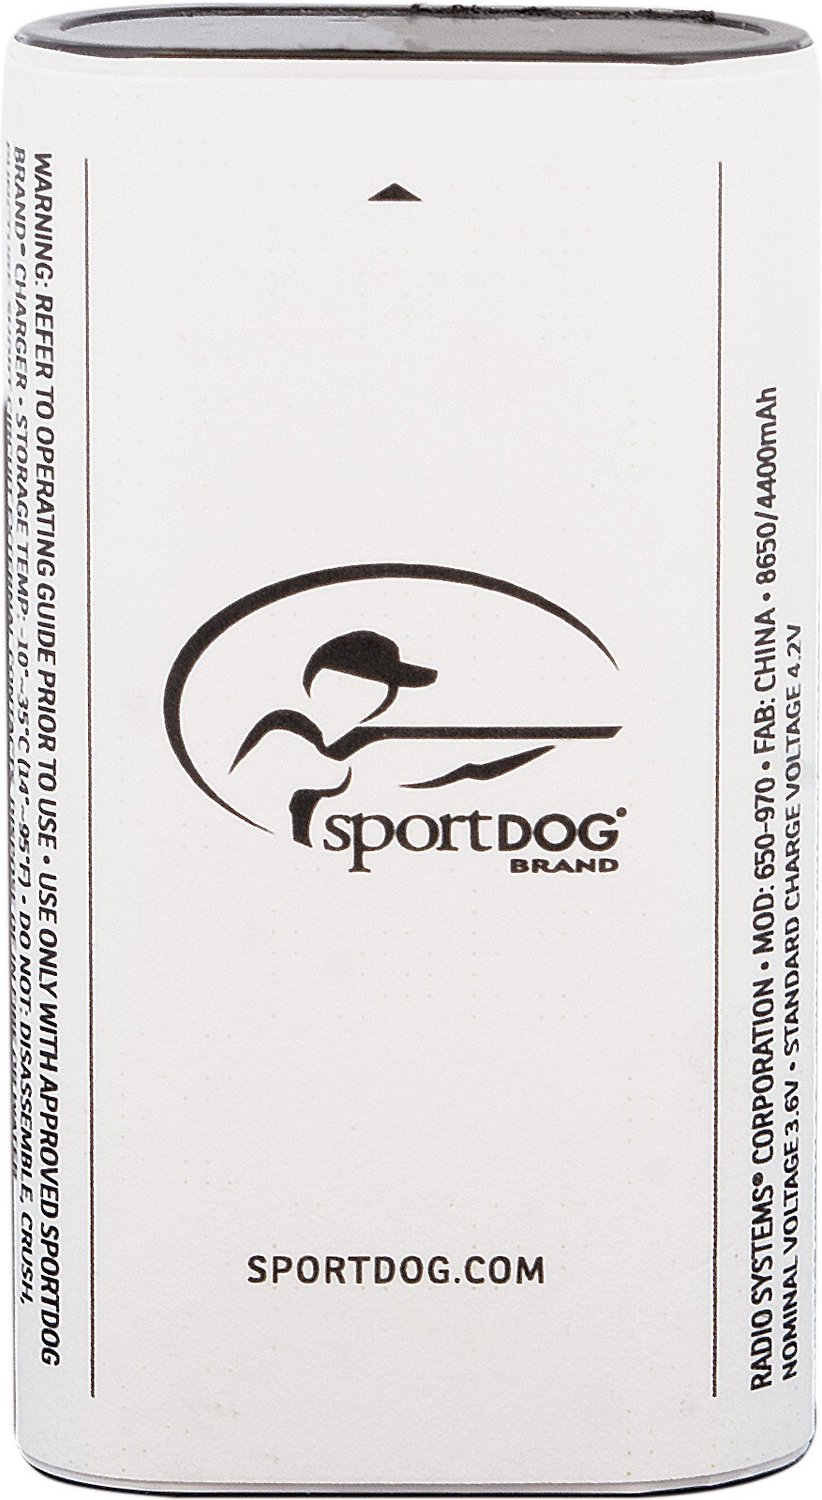 SPORTDOG TEK 2.0 Handheld Device Replacement Battery - Chewy.com